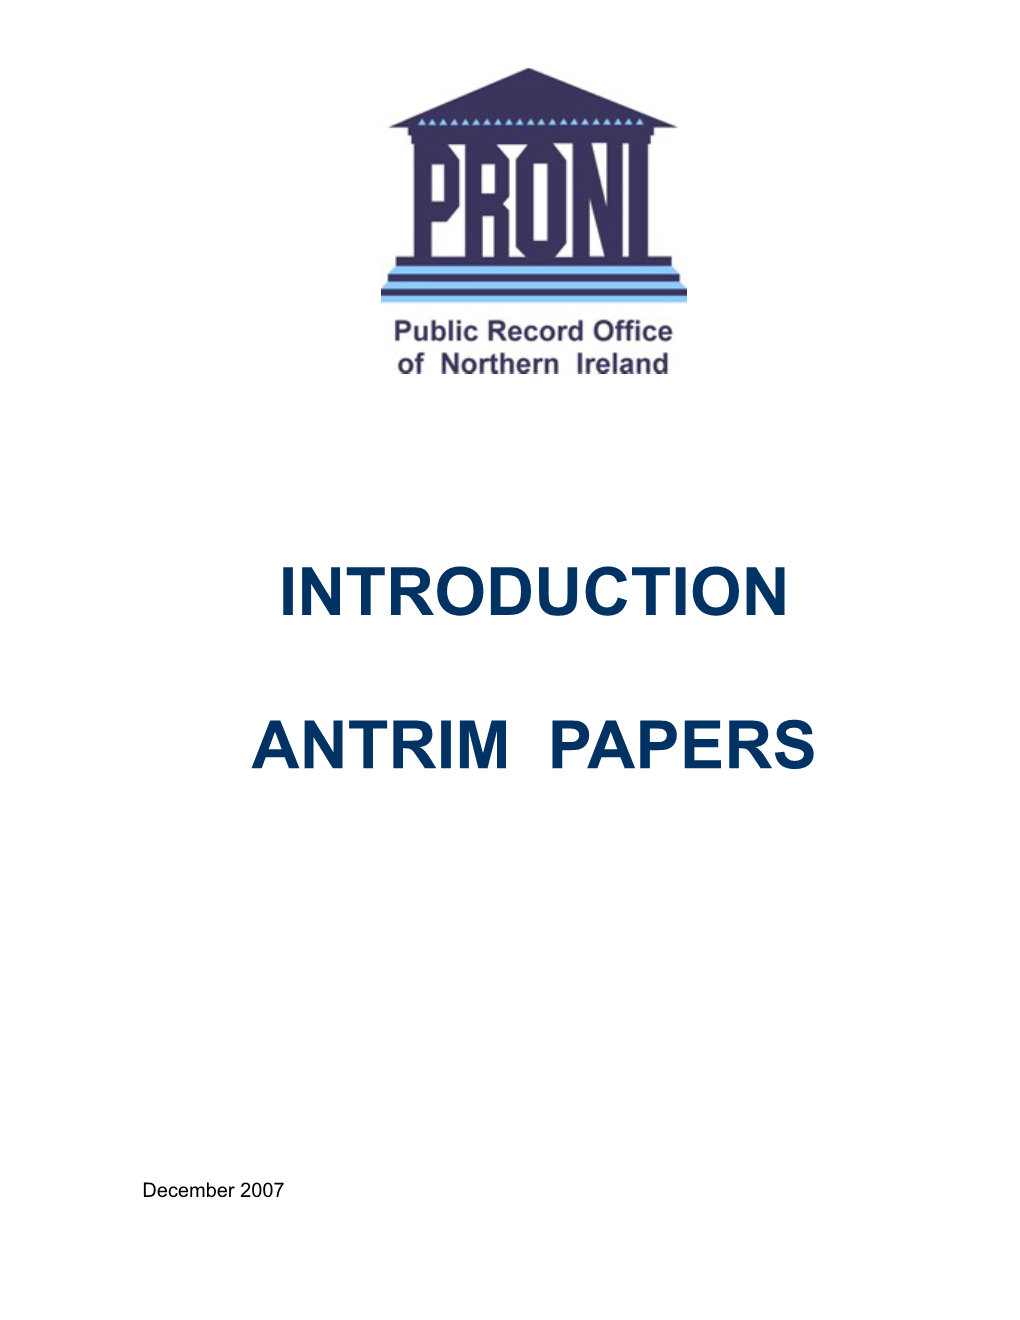 Introduction to the Antrim Papers